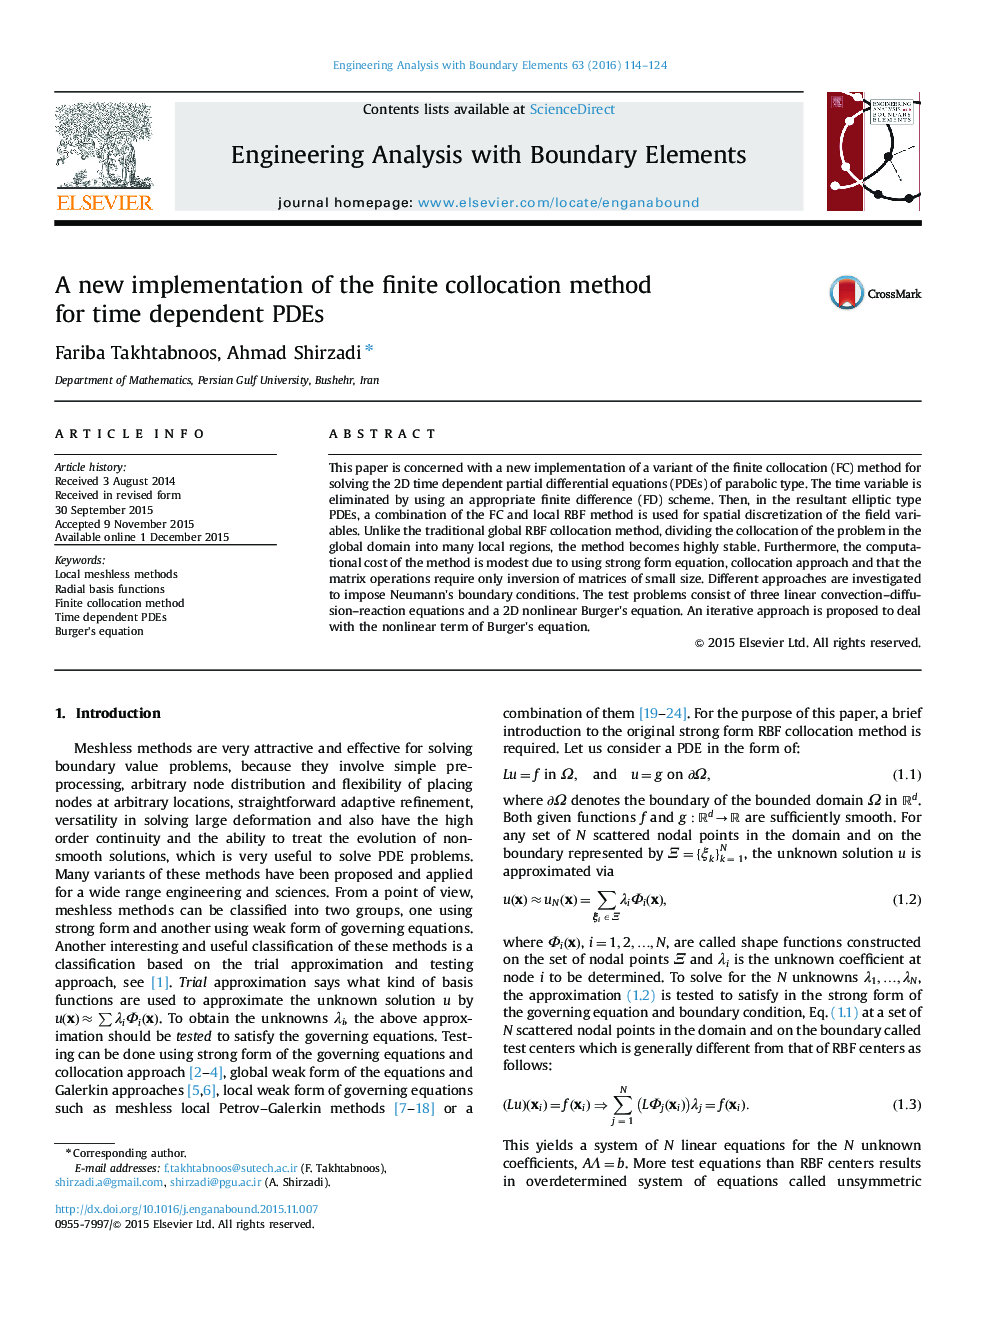 A new implementation of the finite collocation method for time dependent PDEs